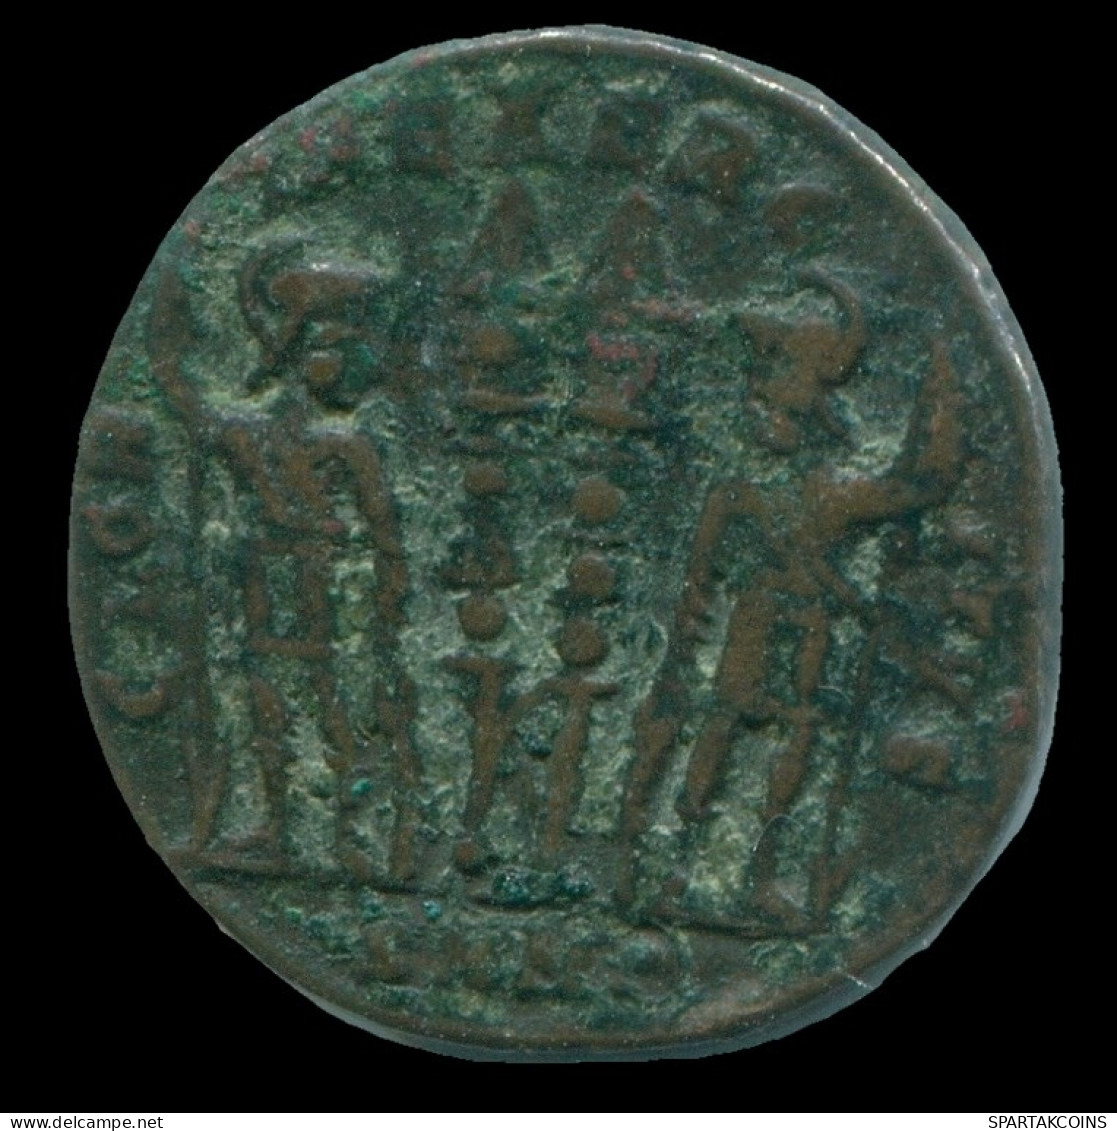 CONSTANTINE I NICOMEDIA Mint ( SMN ) TWO SOLDIERS #ANC13185.18.U.A - El Imperio Christiano (307 / 363)